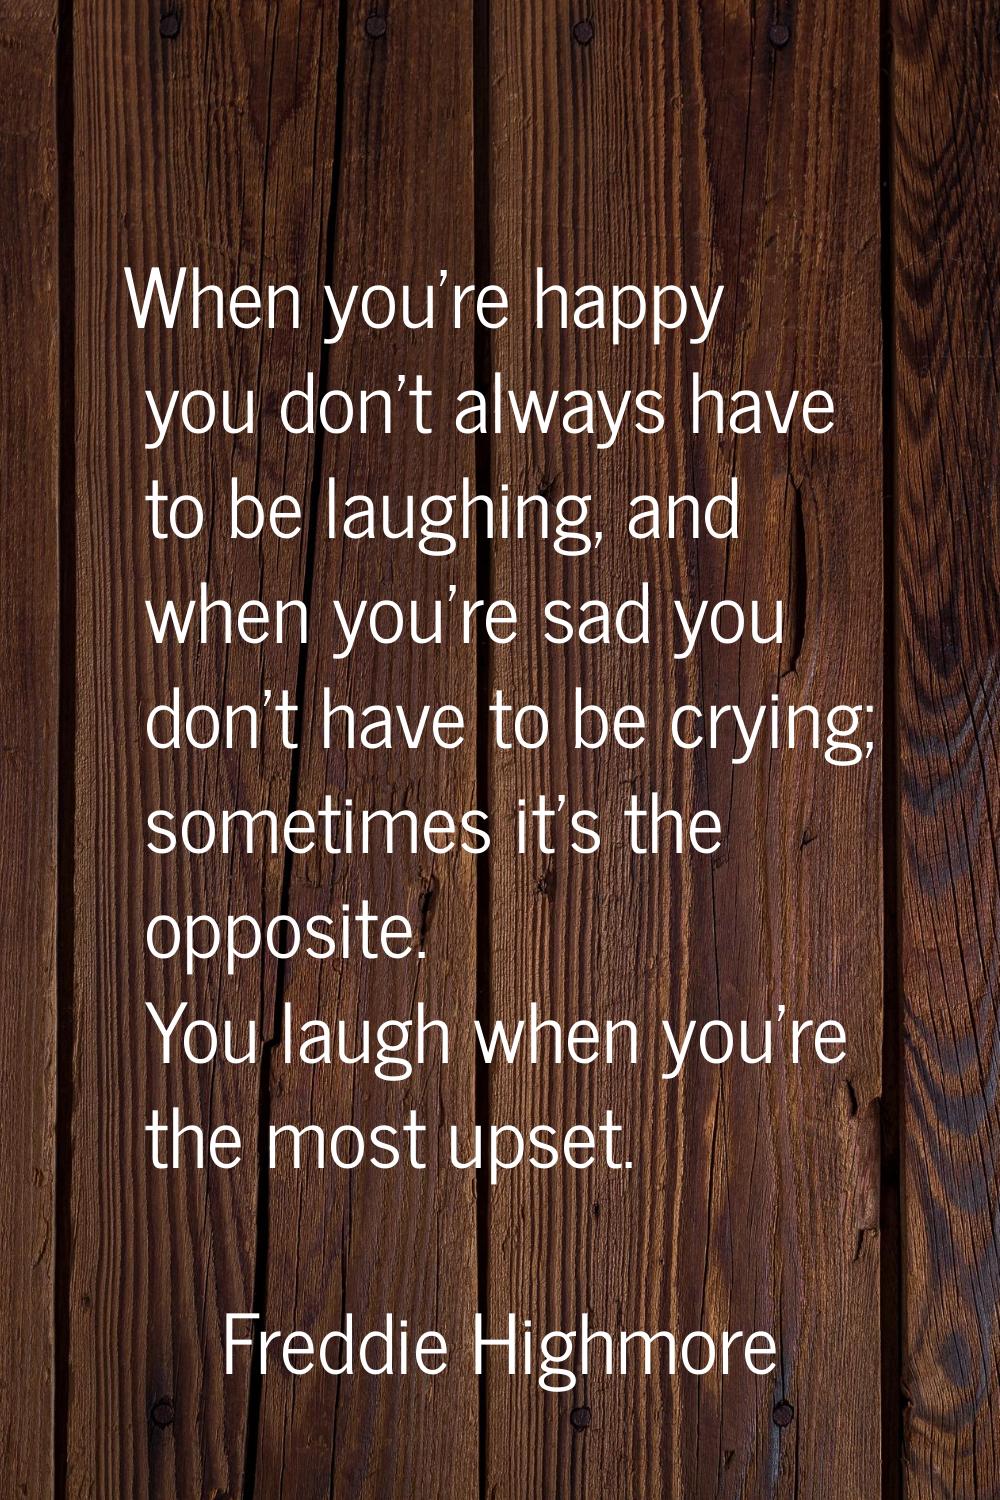 When you're happy you don't always have to be laughing, and when you're sad you don't have to be cr